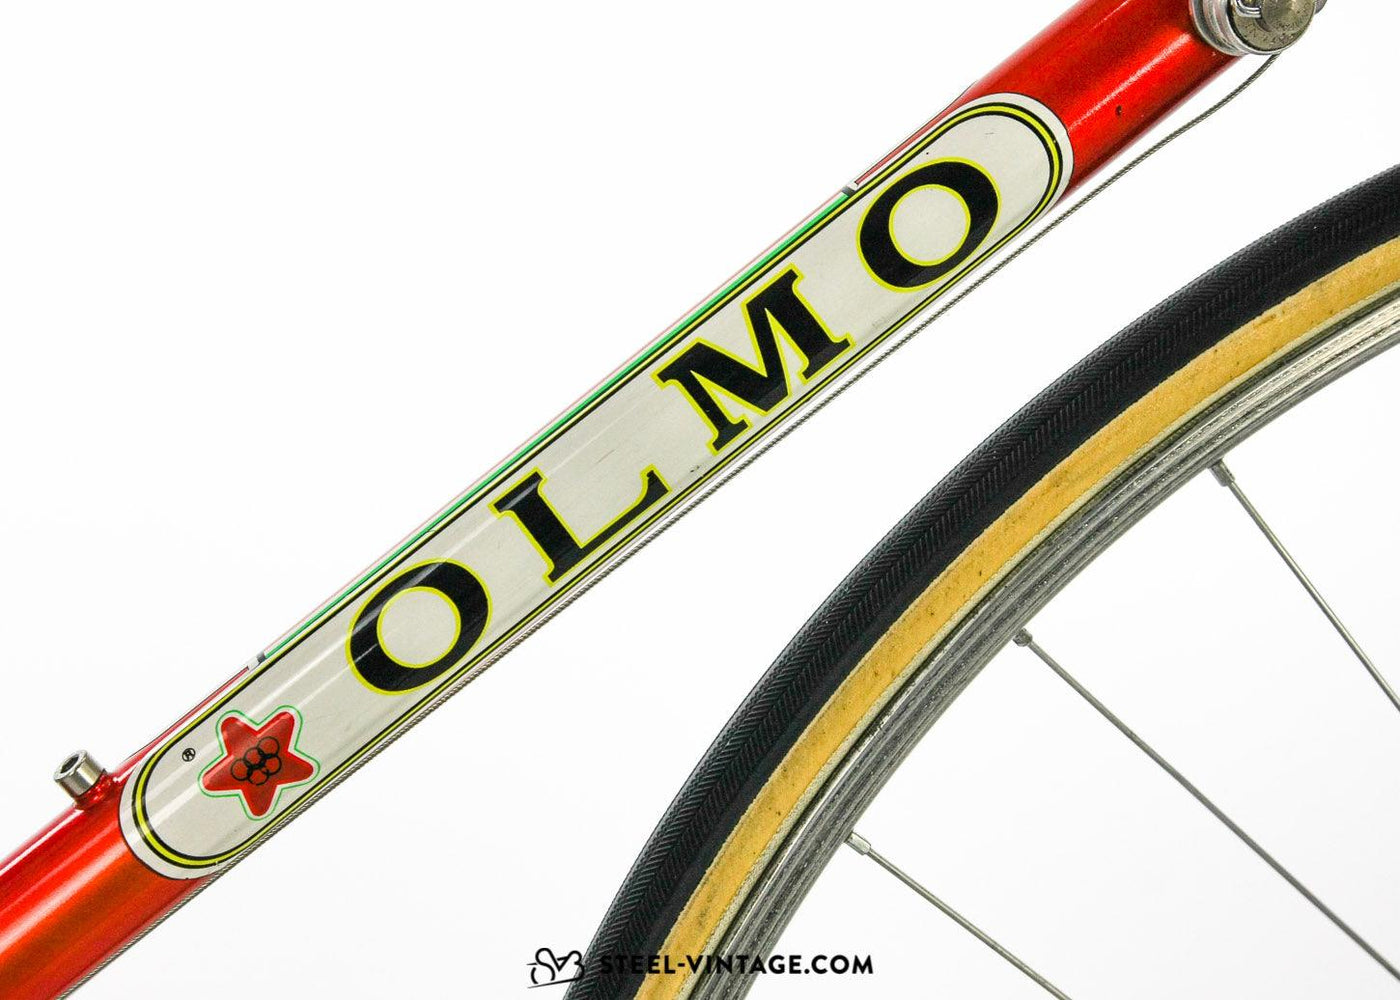 Olmo Competition C Classic Bike 1970s - Steel Vintage Bikes